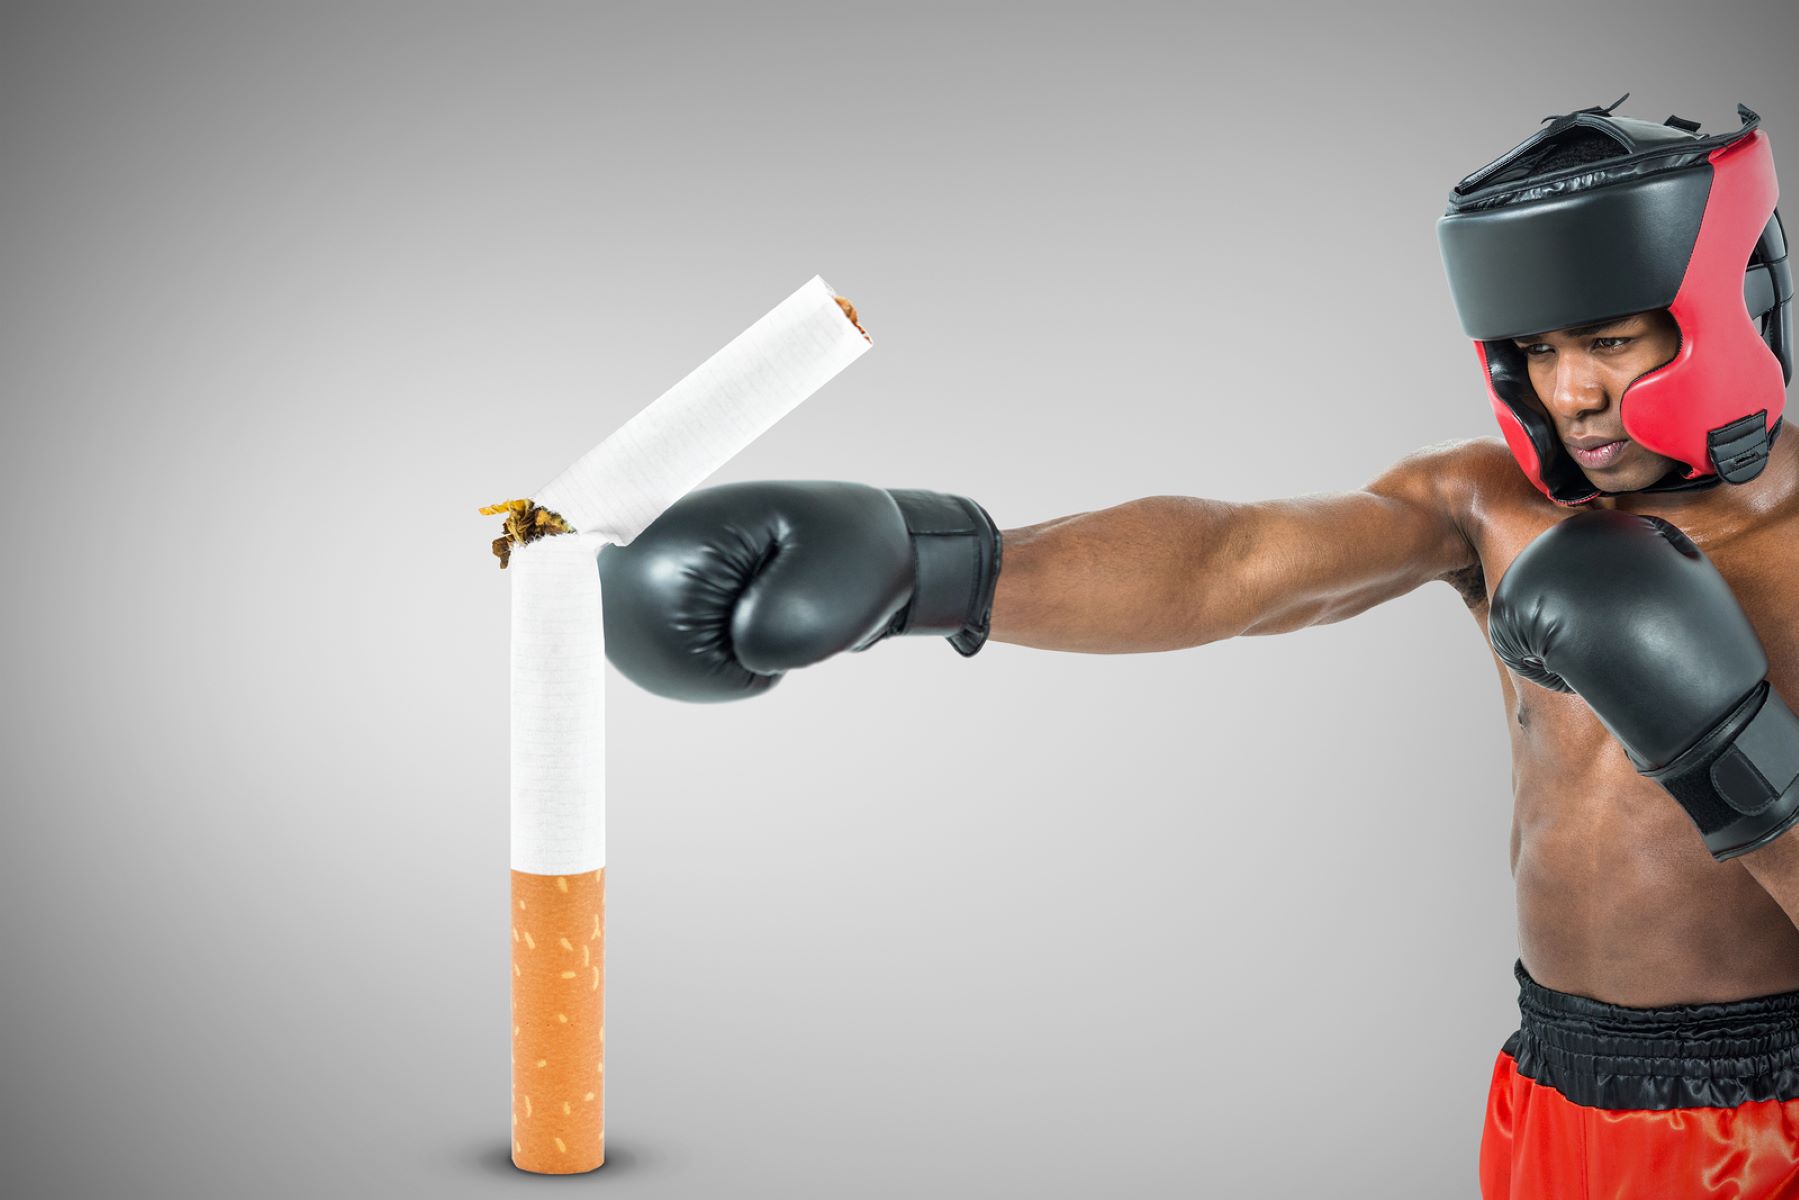 How Does Tobacco Affect Athletic Performance